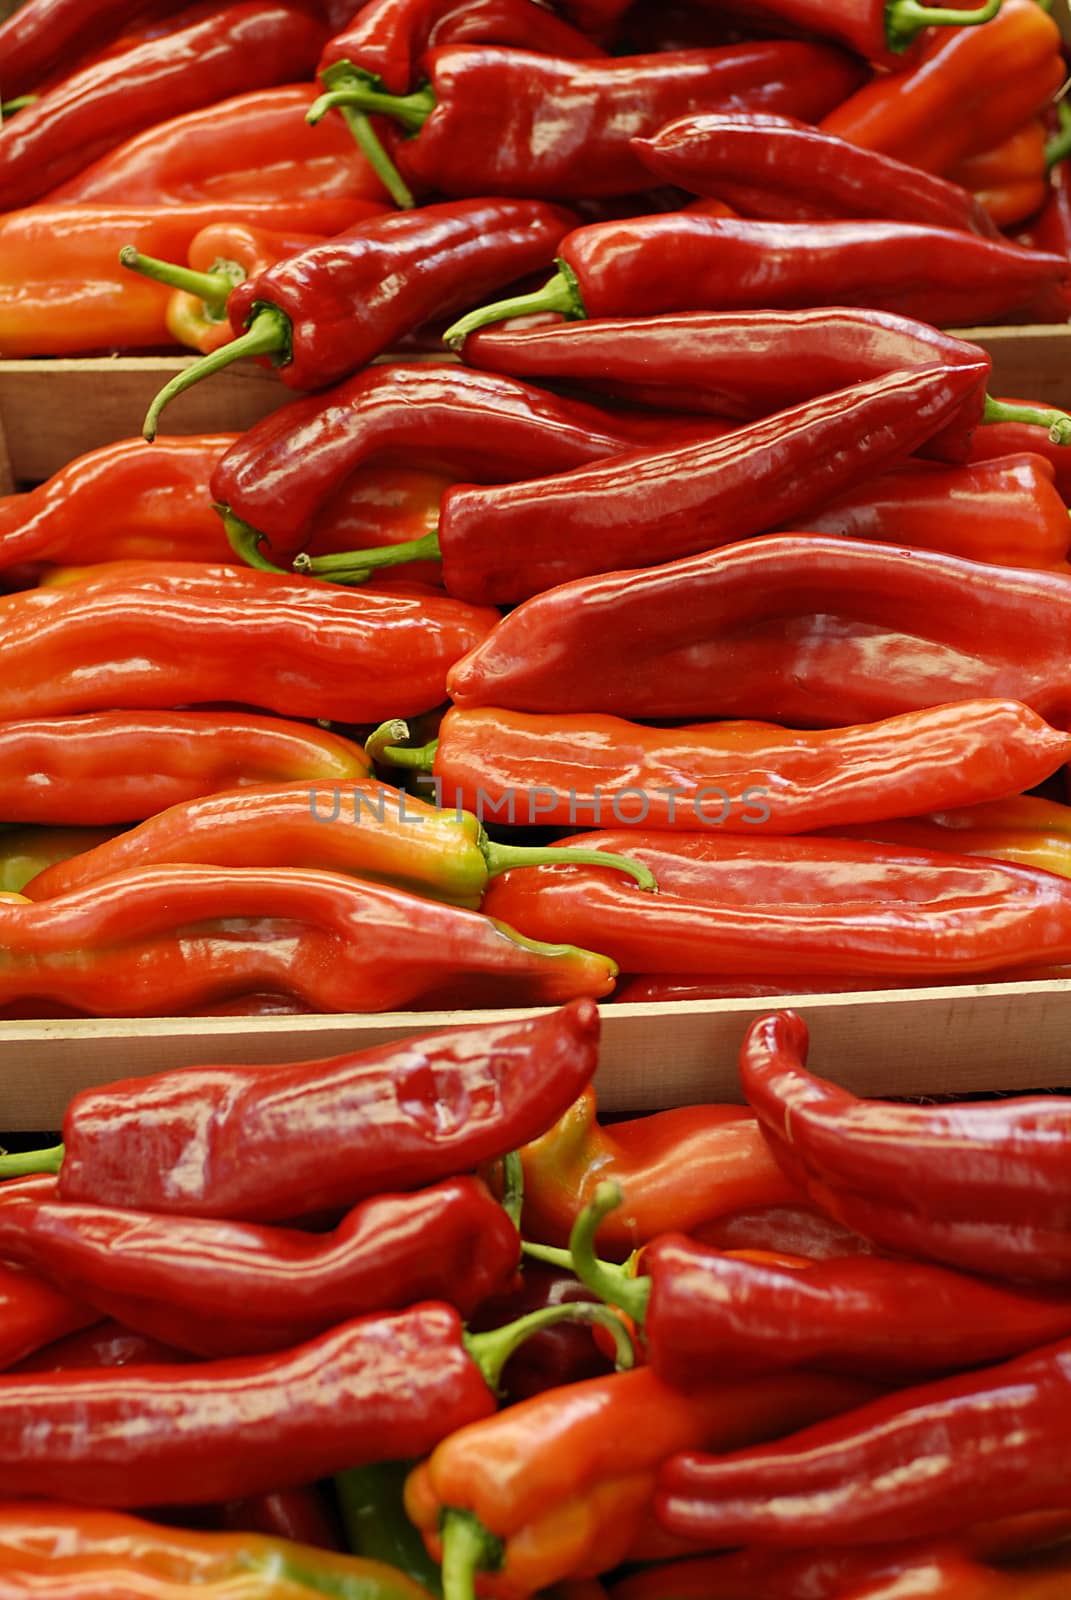 Red chilli peppers at market stall, close-up by stockyimages